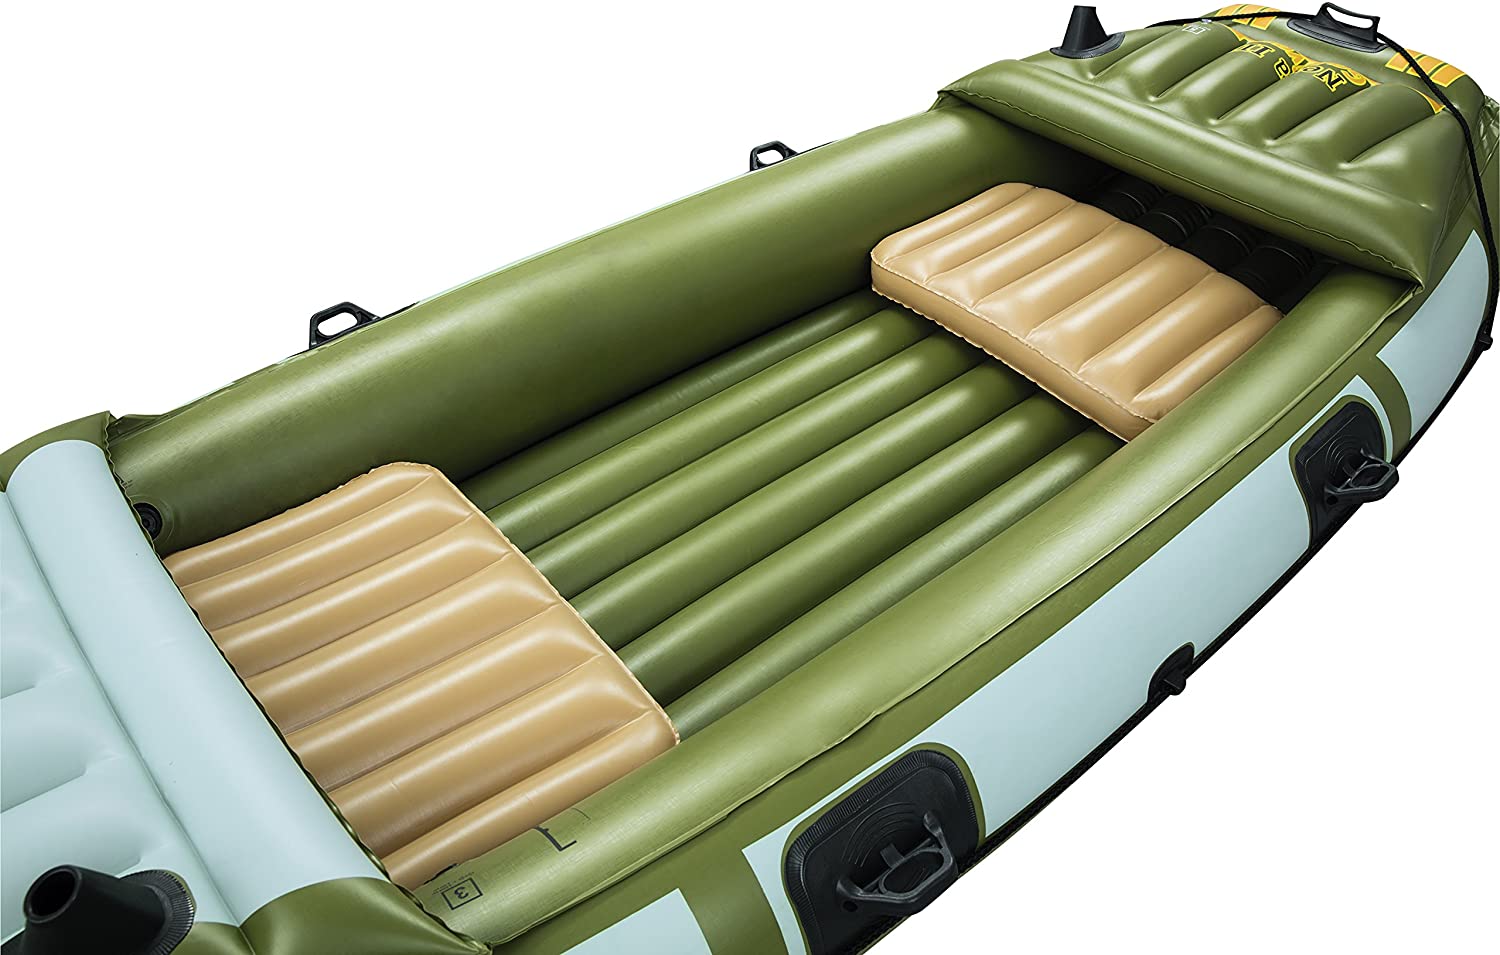 Bestway Voyager 300 2-Person Inflatable Boat - MGA STAR MARKETING 